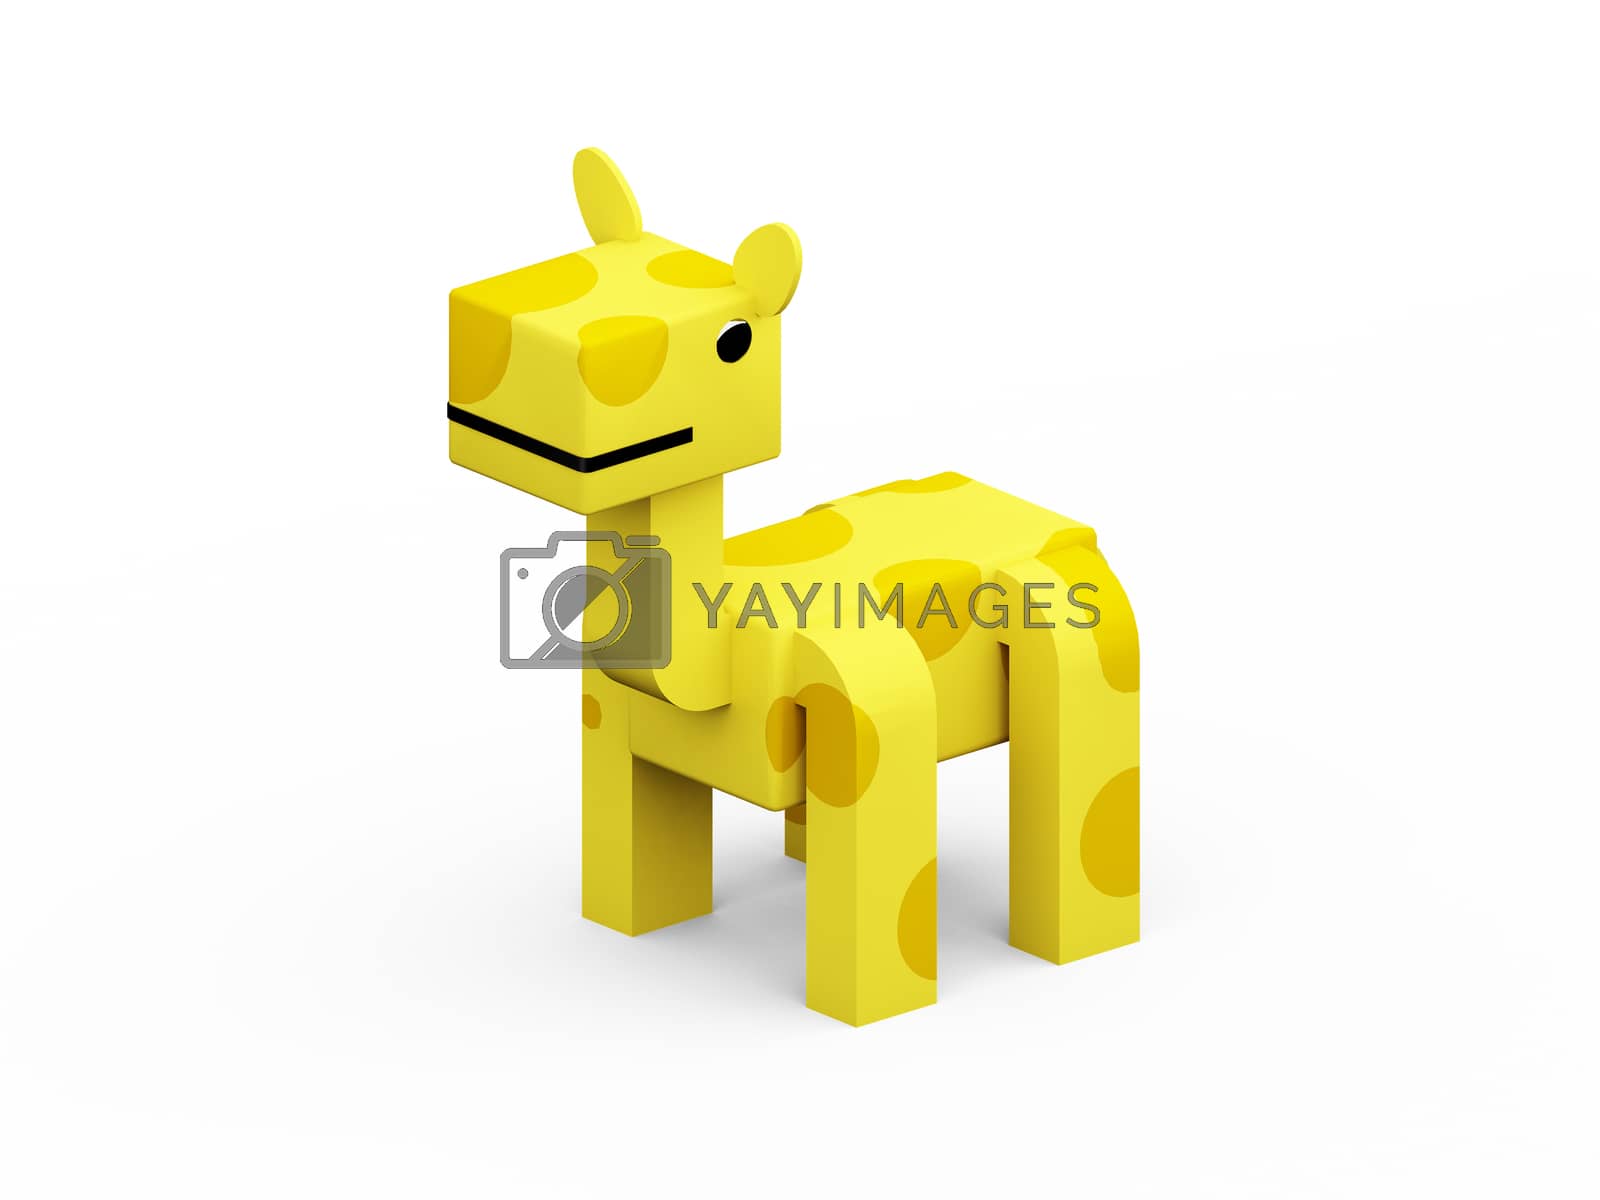 Royalty free image of giraffe 3d low polygon isolate on white background by teerawit